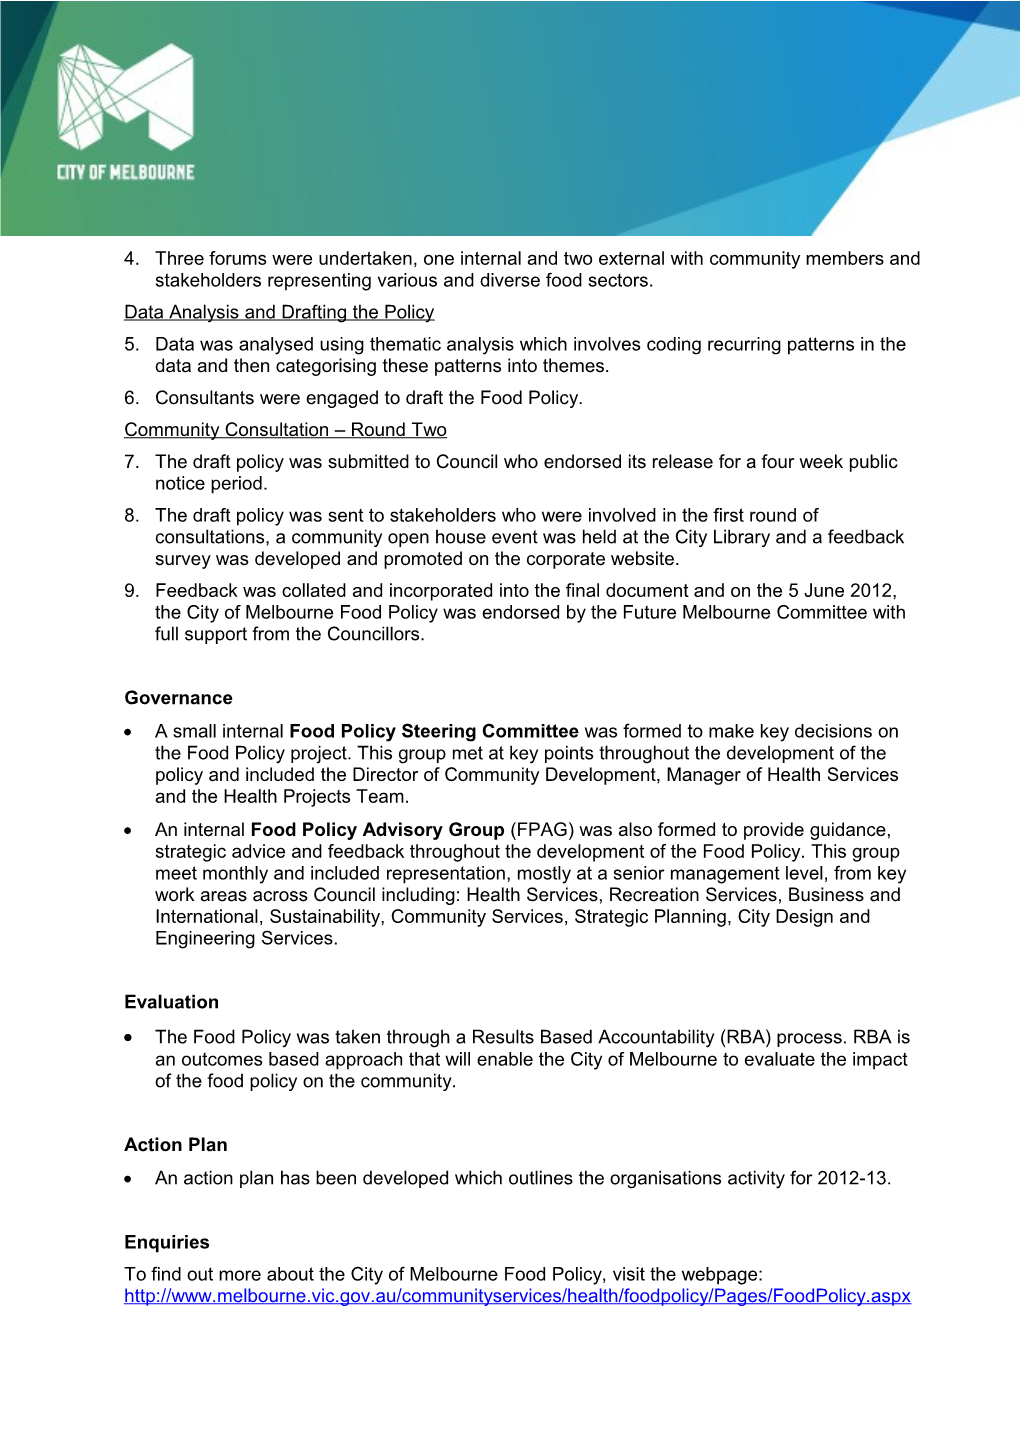 Fact Sheet: City Of Melbourne Food Policy